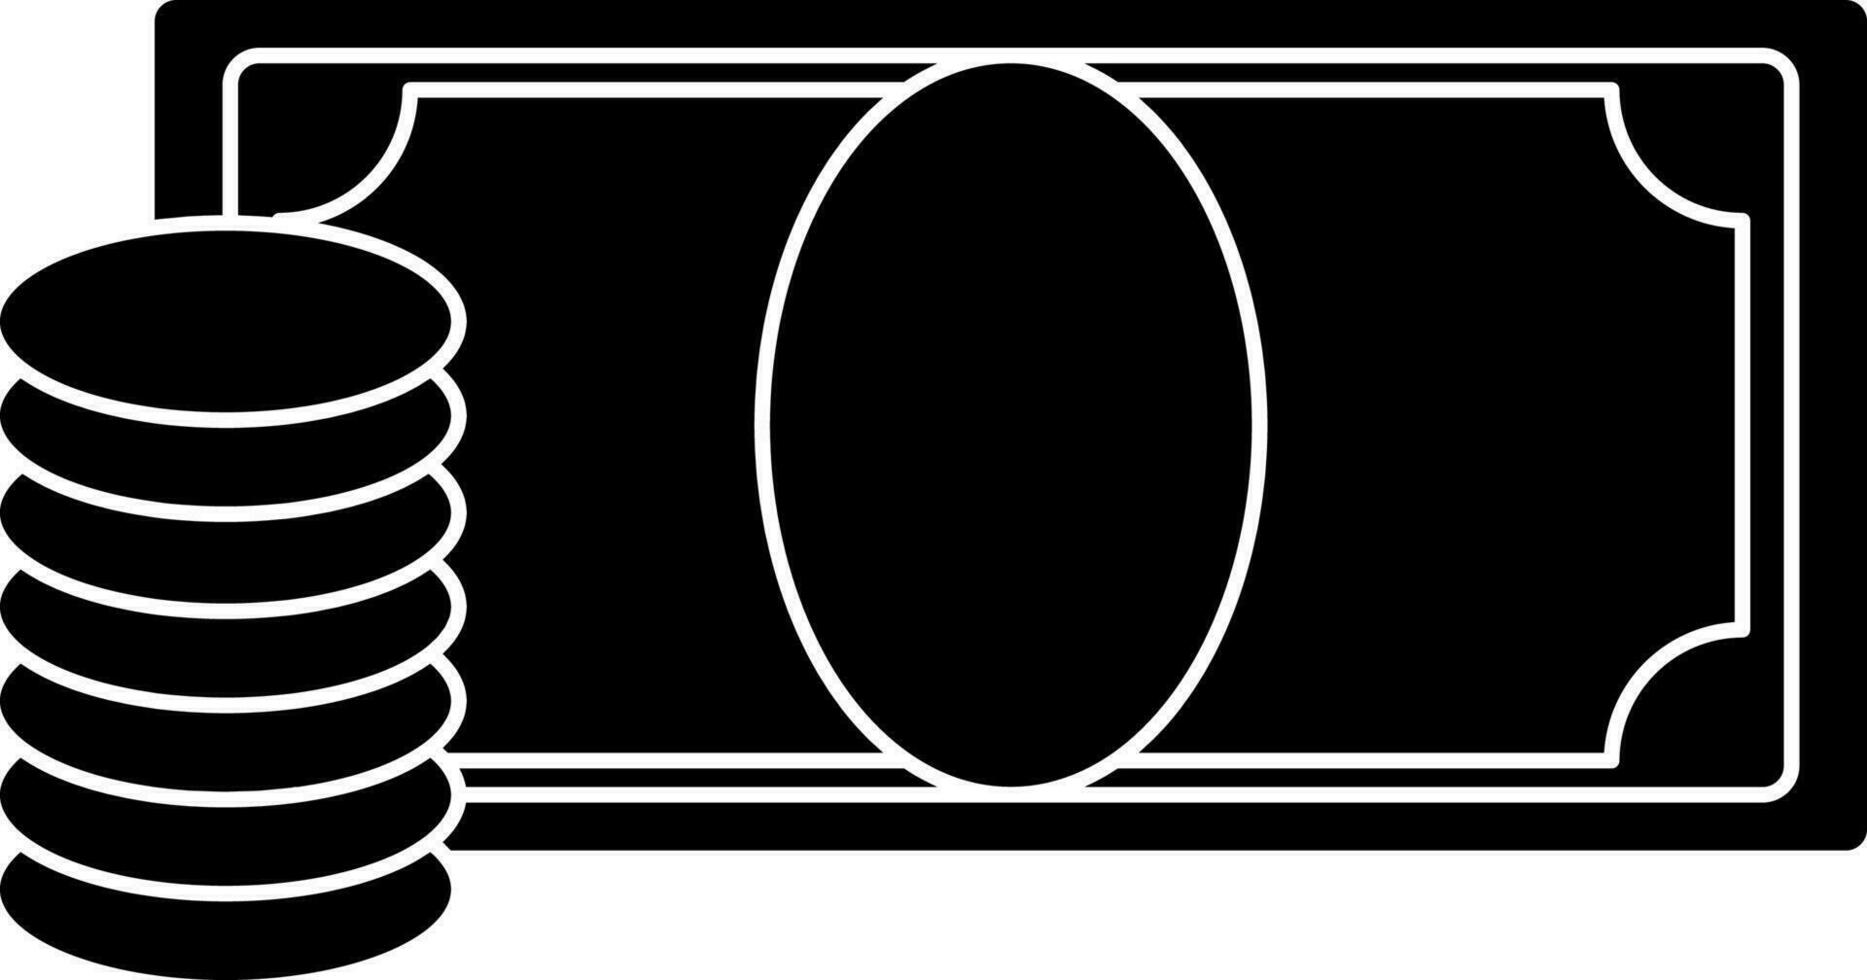 Money in black and white color. vector